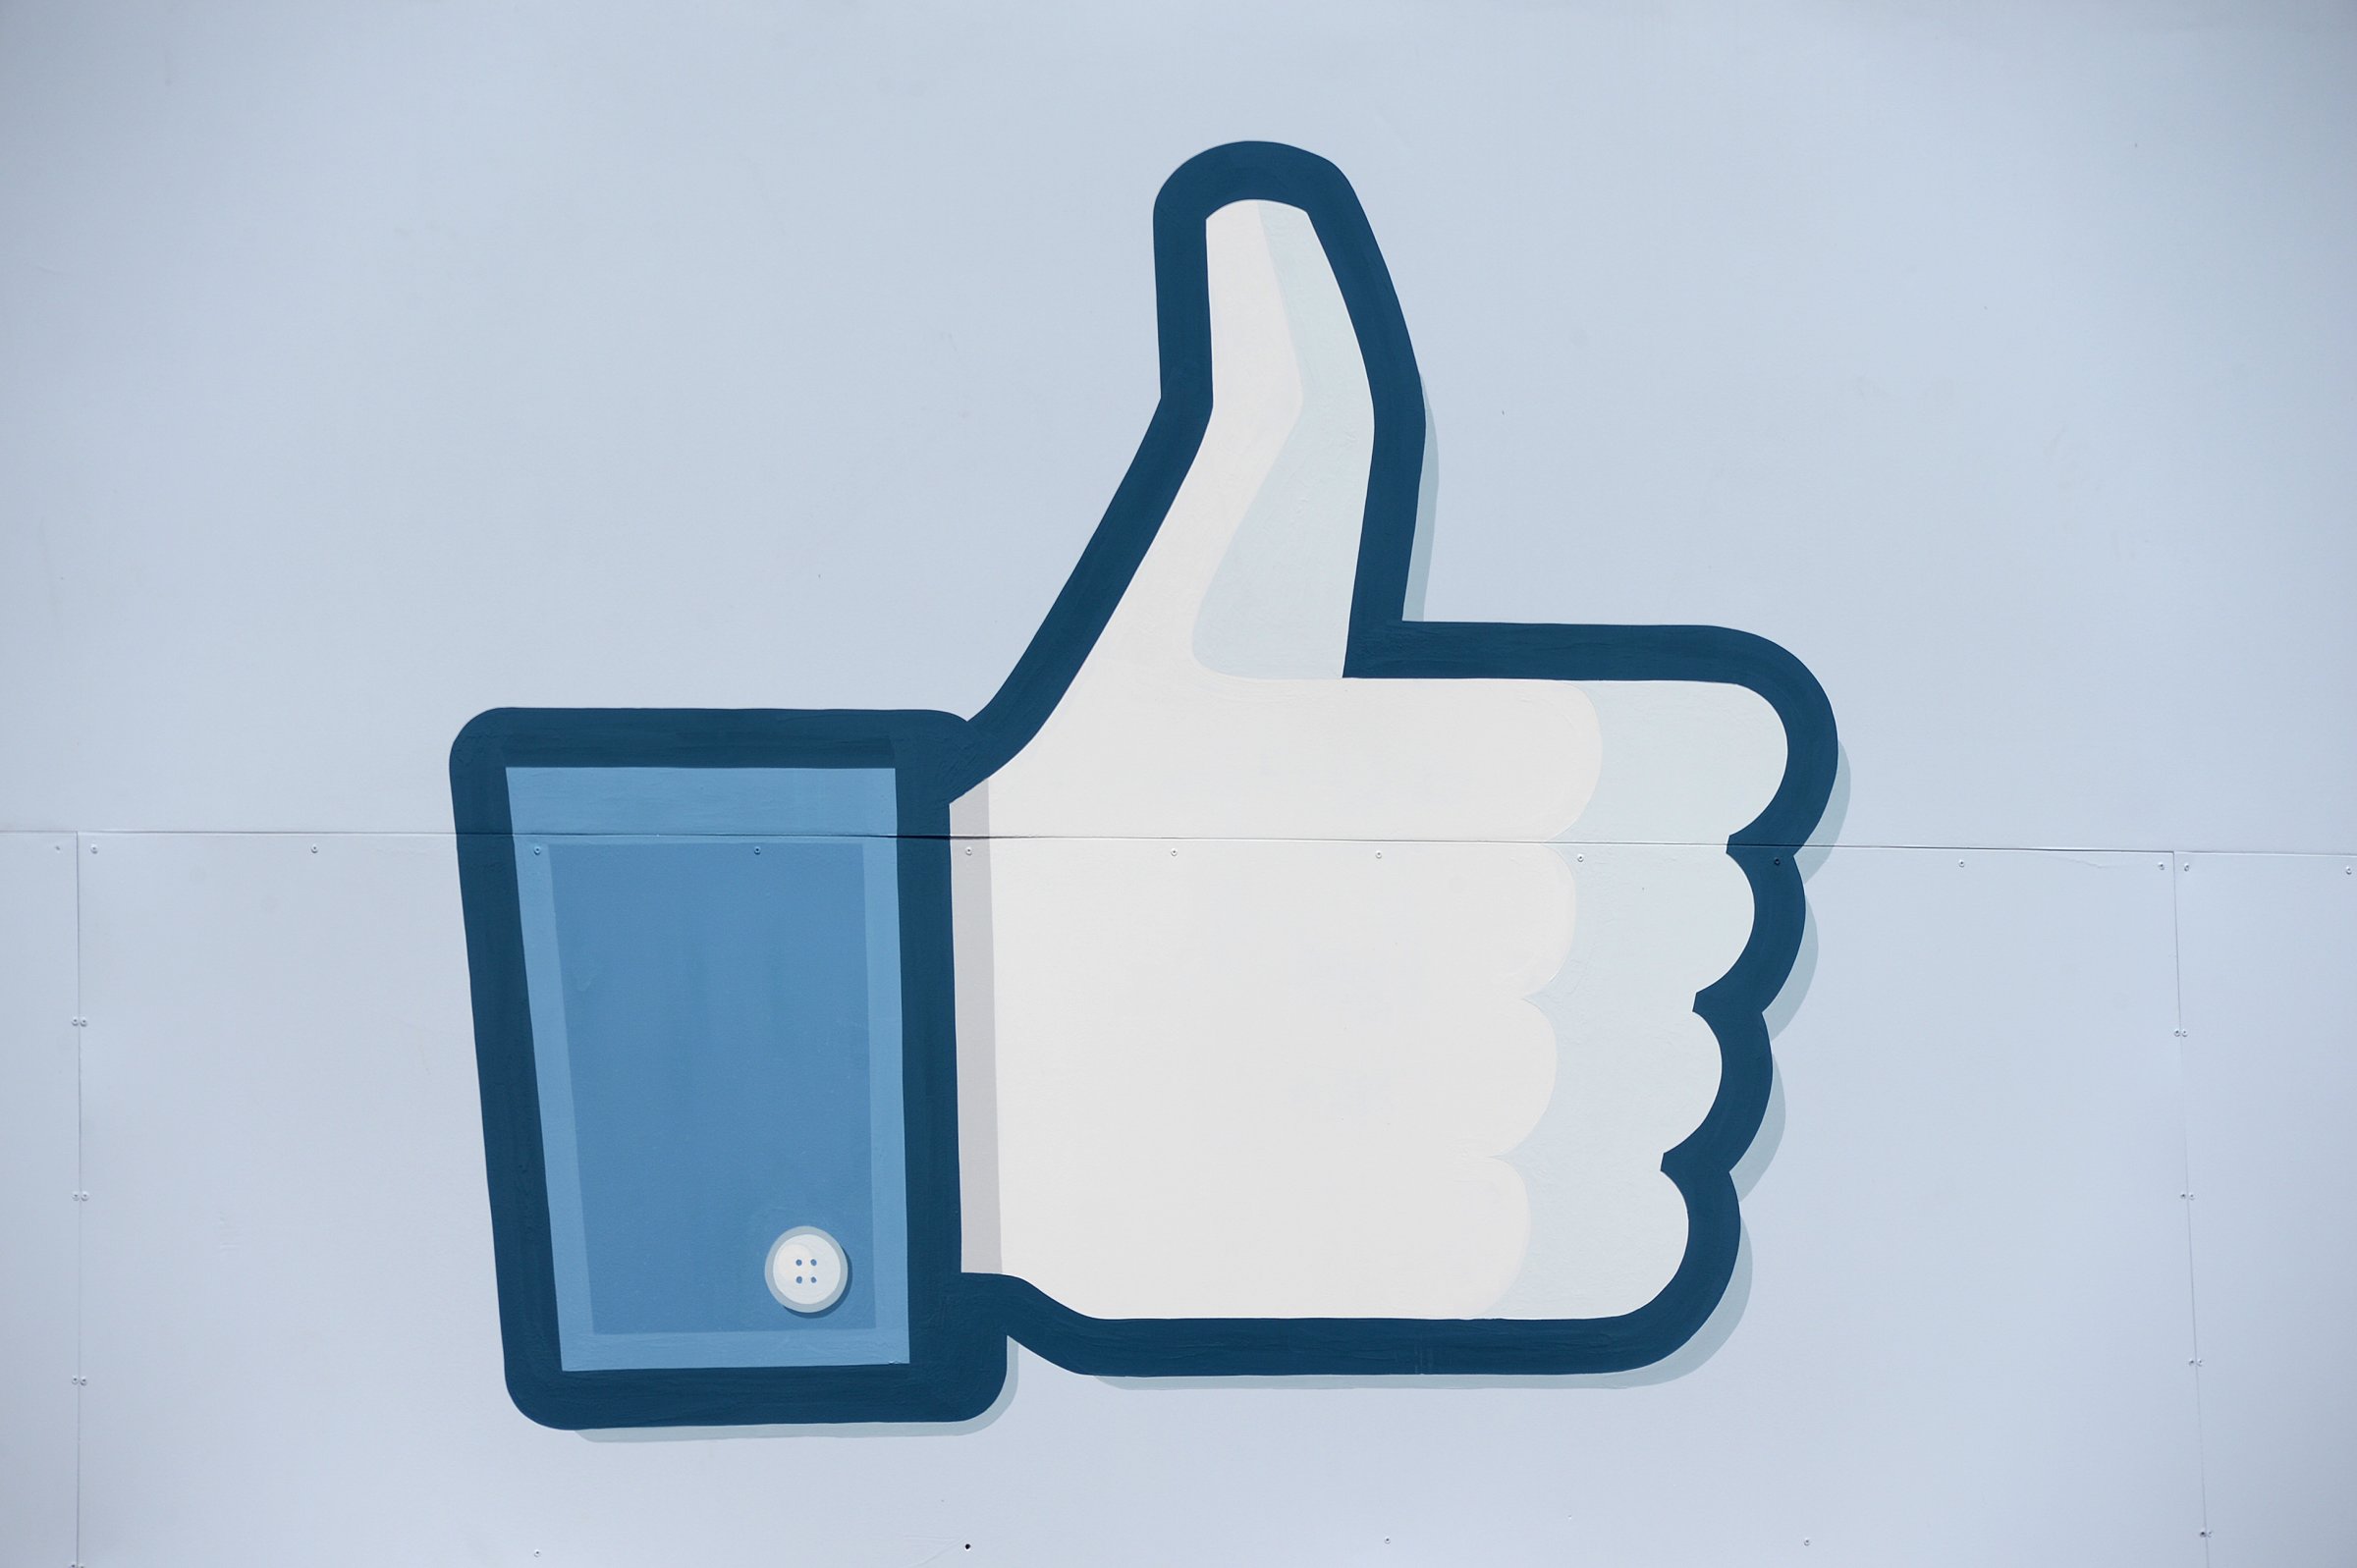 The "Like" button icon at the Facebook main campus in Menlo Park, Calif., on May 15, 2012.